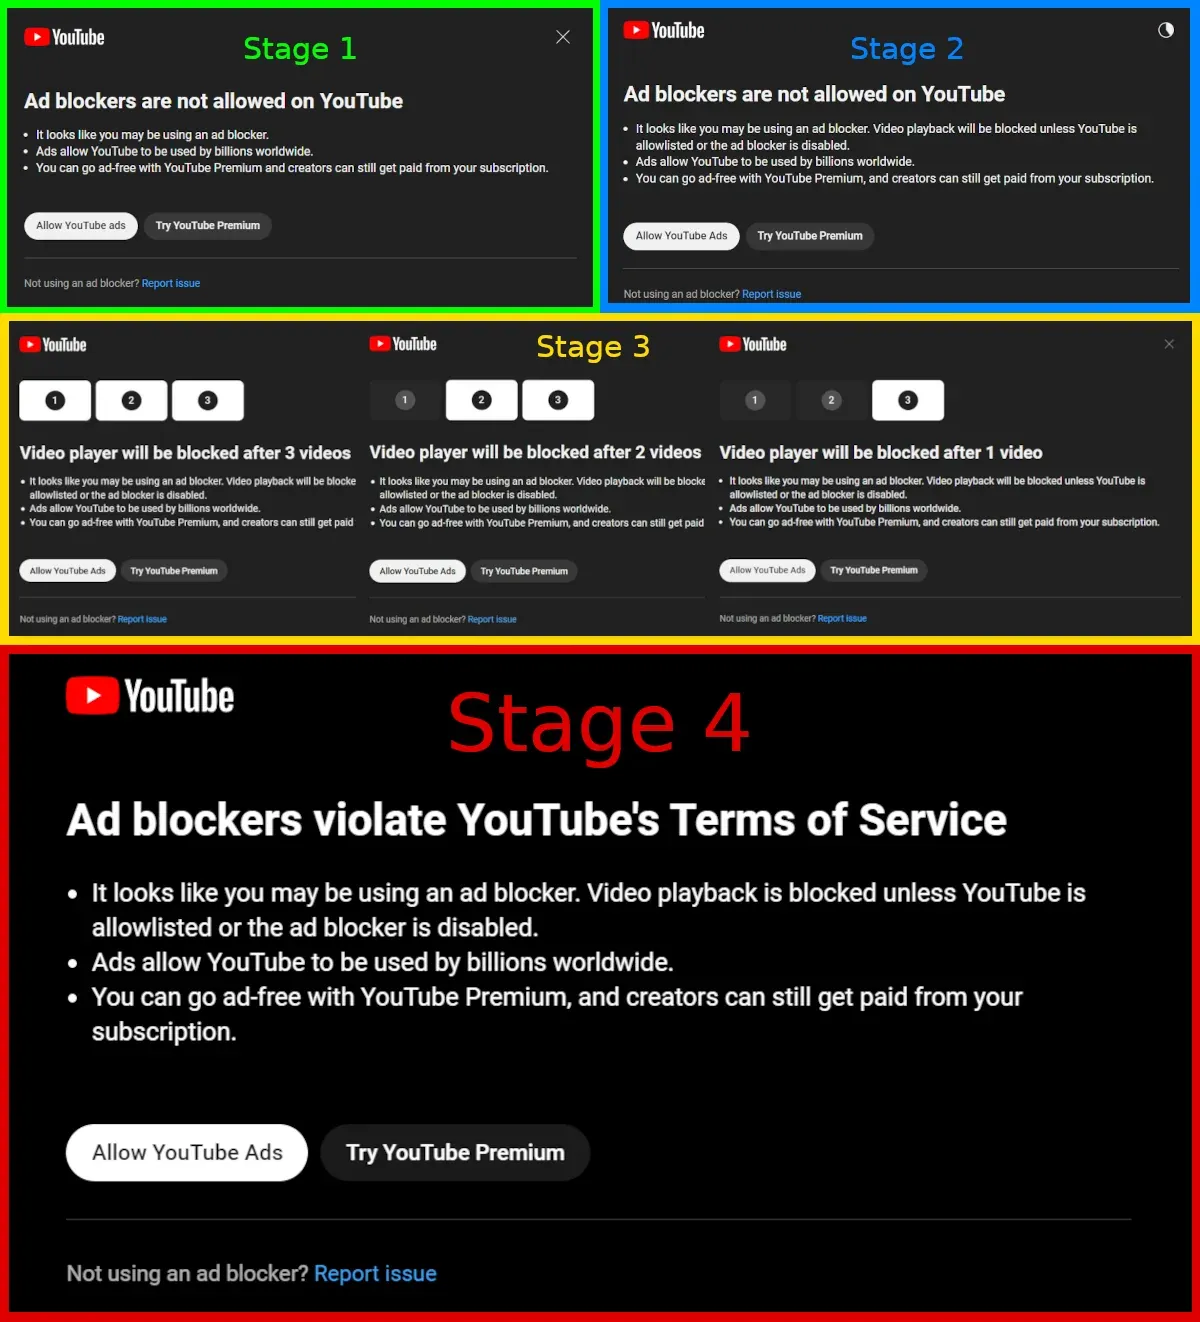 "Ad blockers violate YouTube's Terms of Service. It looks like you may be using an ad blocker." 